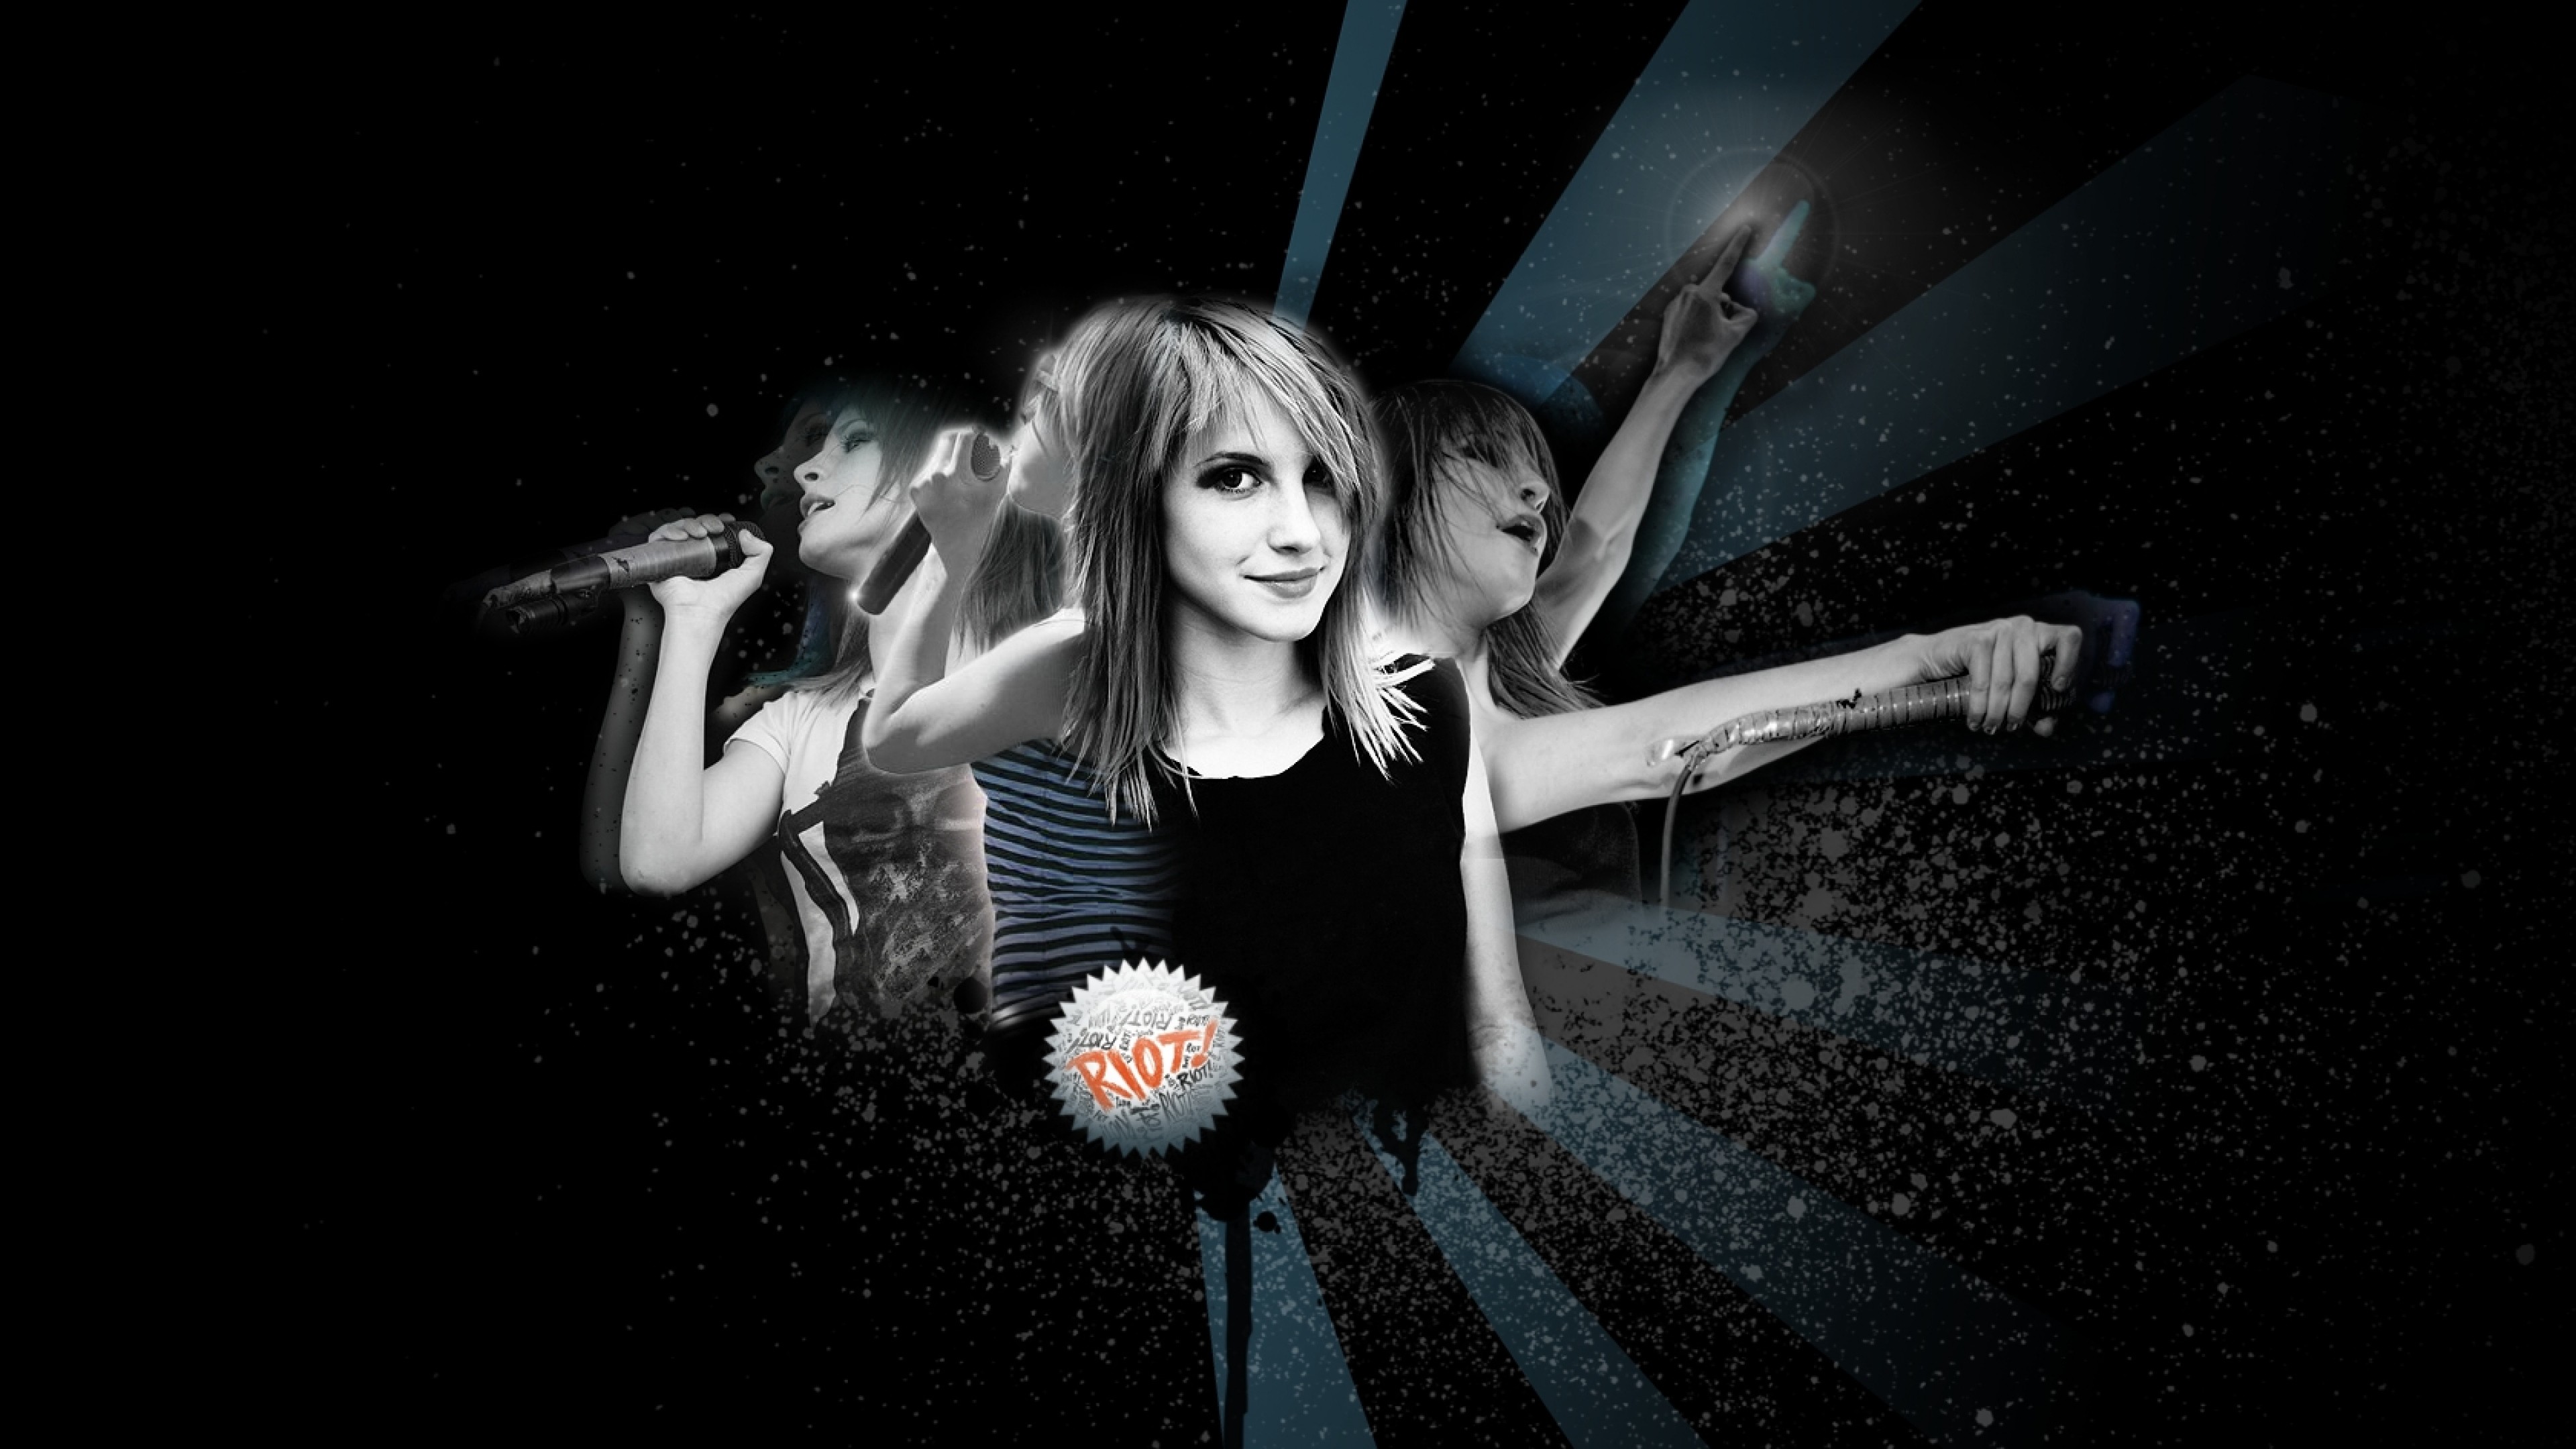 3840x2160  Wallpaper paramore, girl, graphics, background, spray